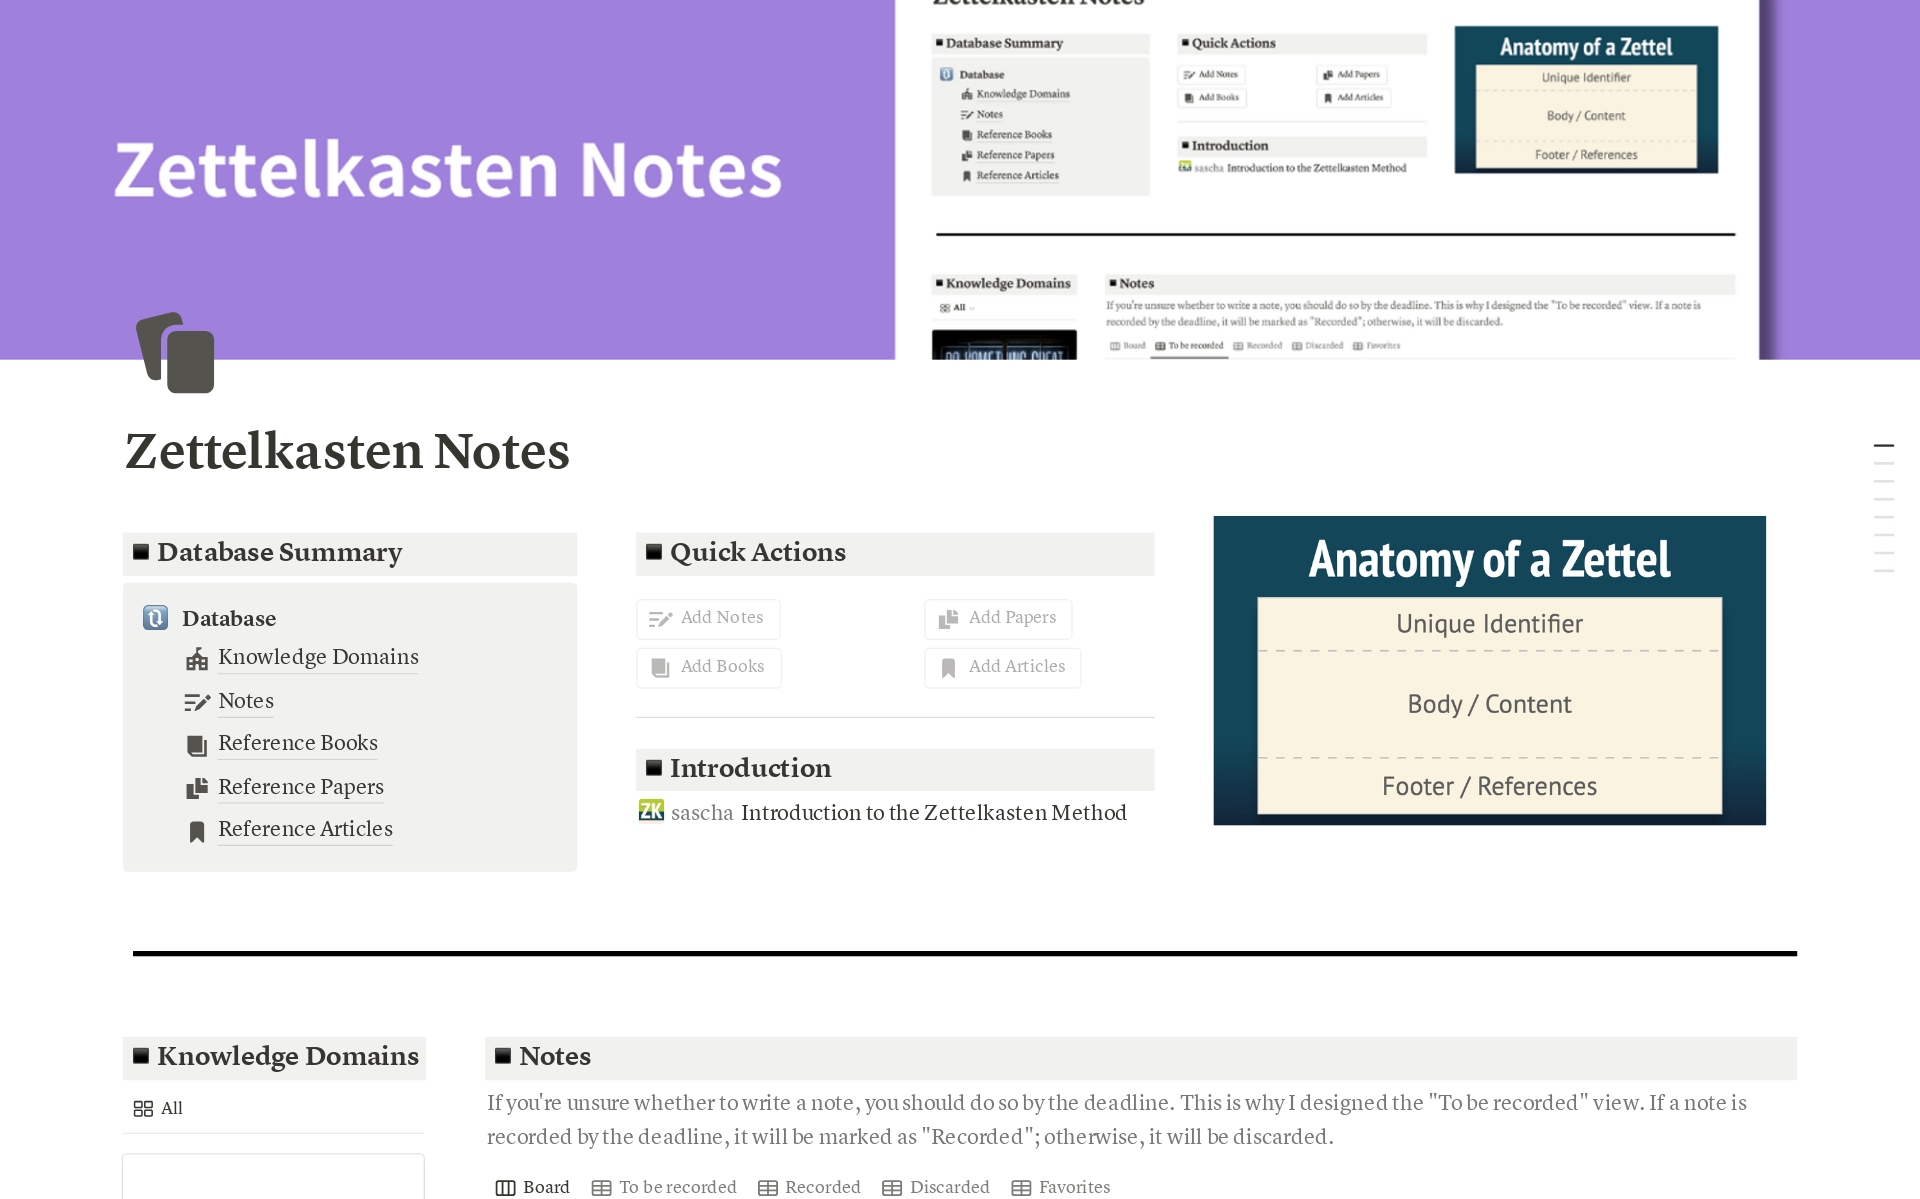 By using this Notion template, you can streamline your note-taking process, ensure thorough documentation and citation, and manage your knowledge efficiently. 